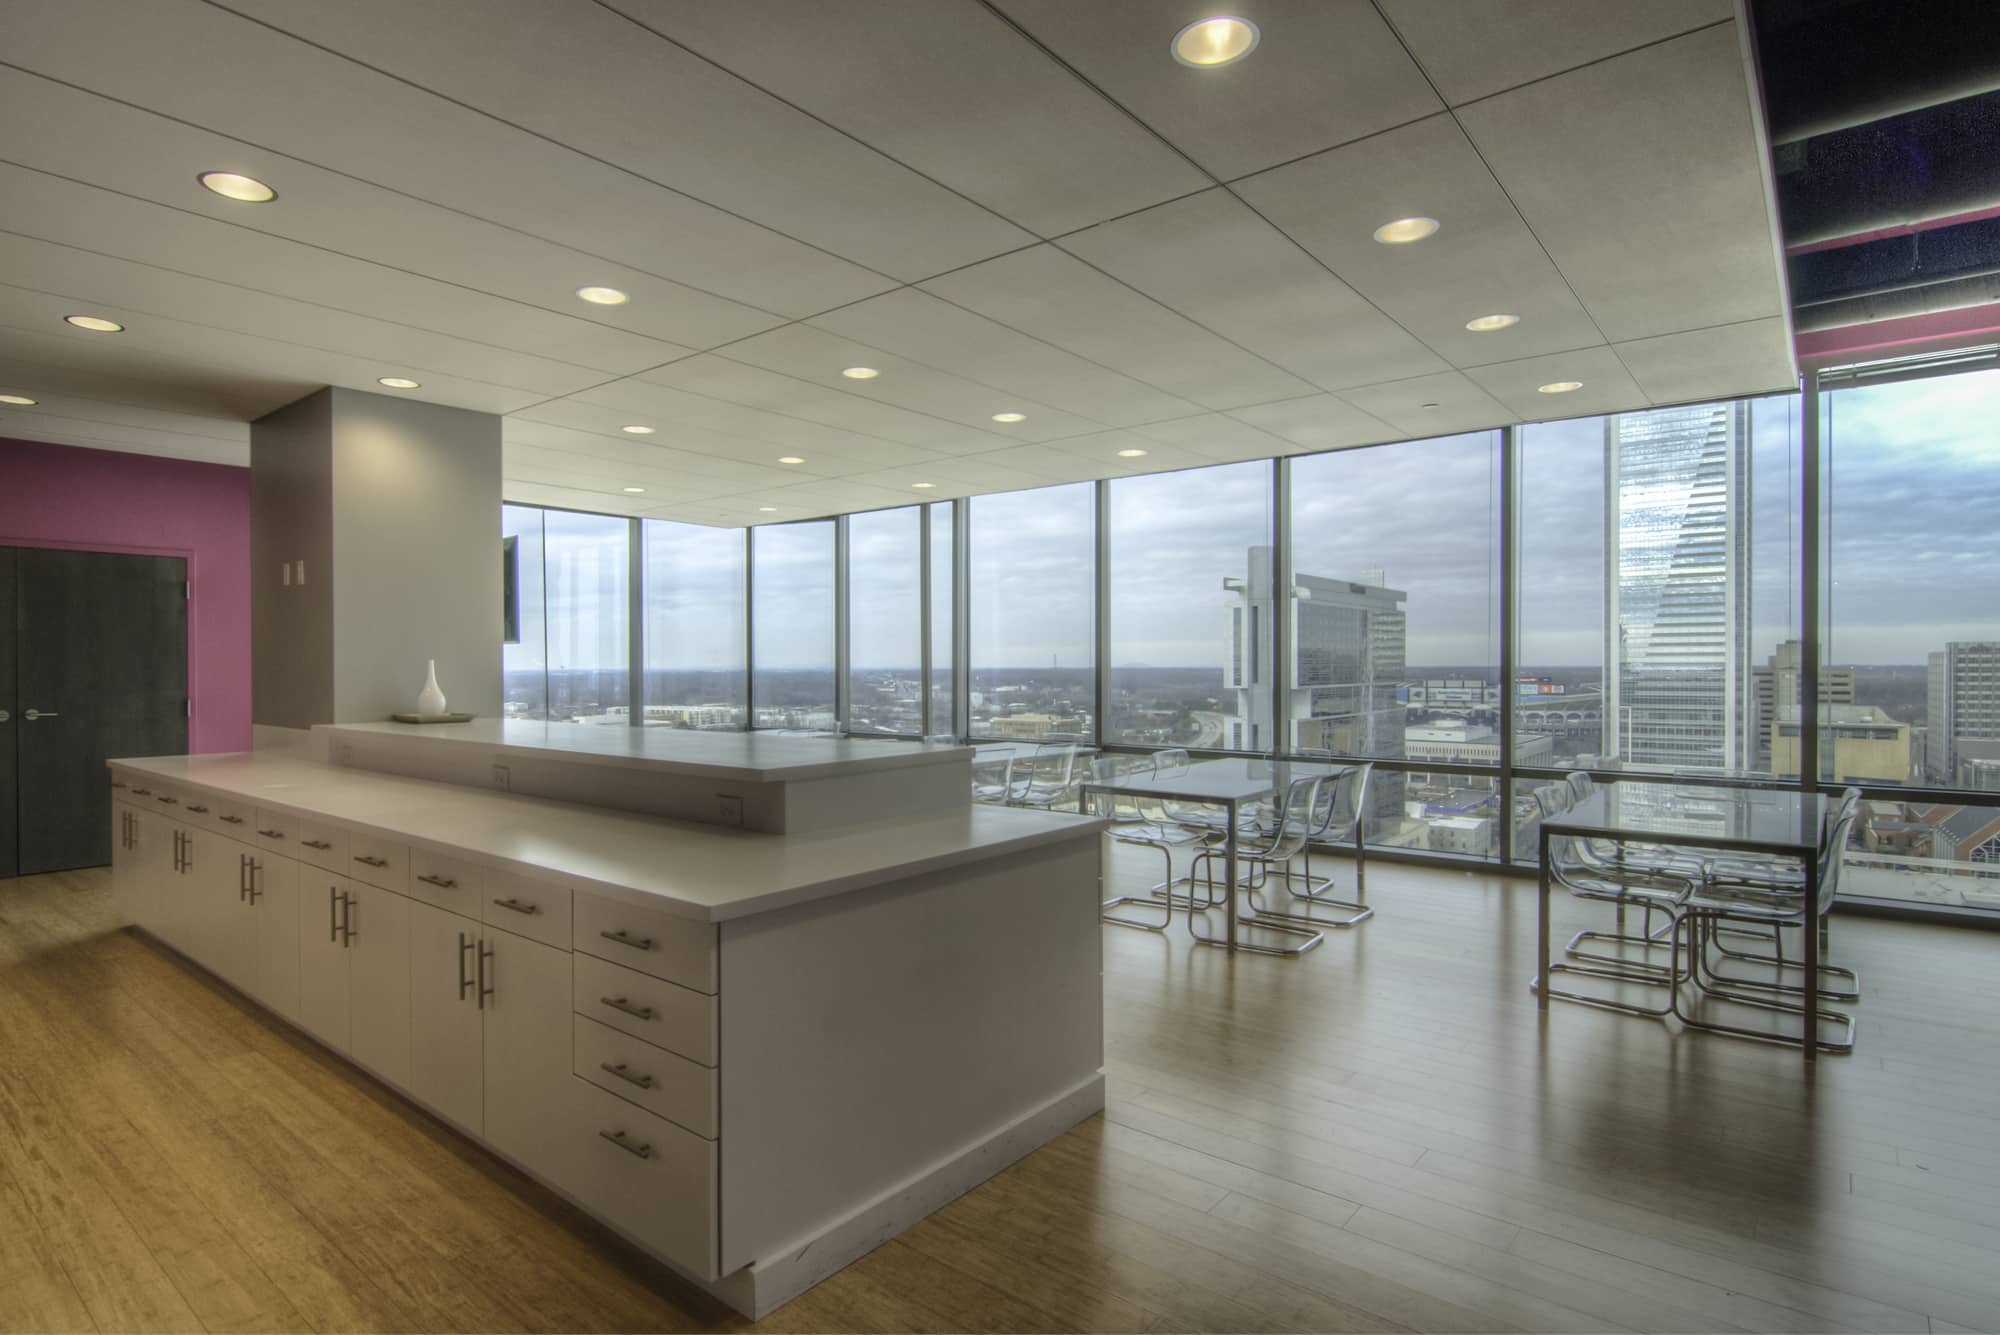 An office with large windows overlooking a city.